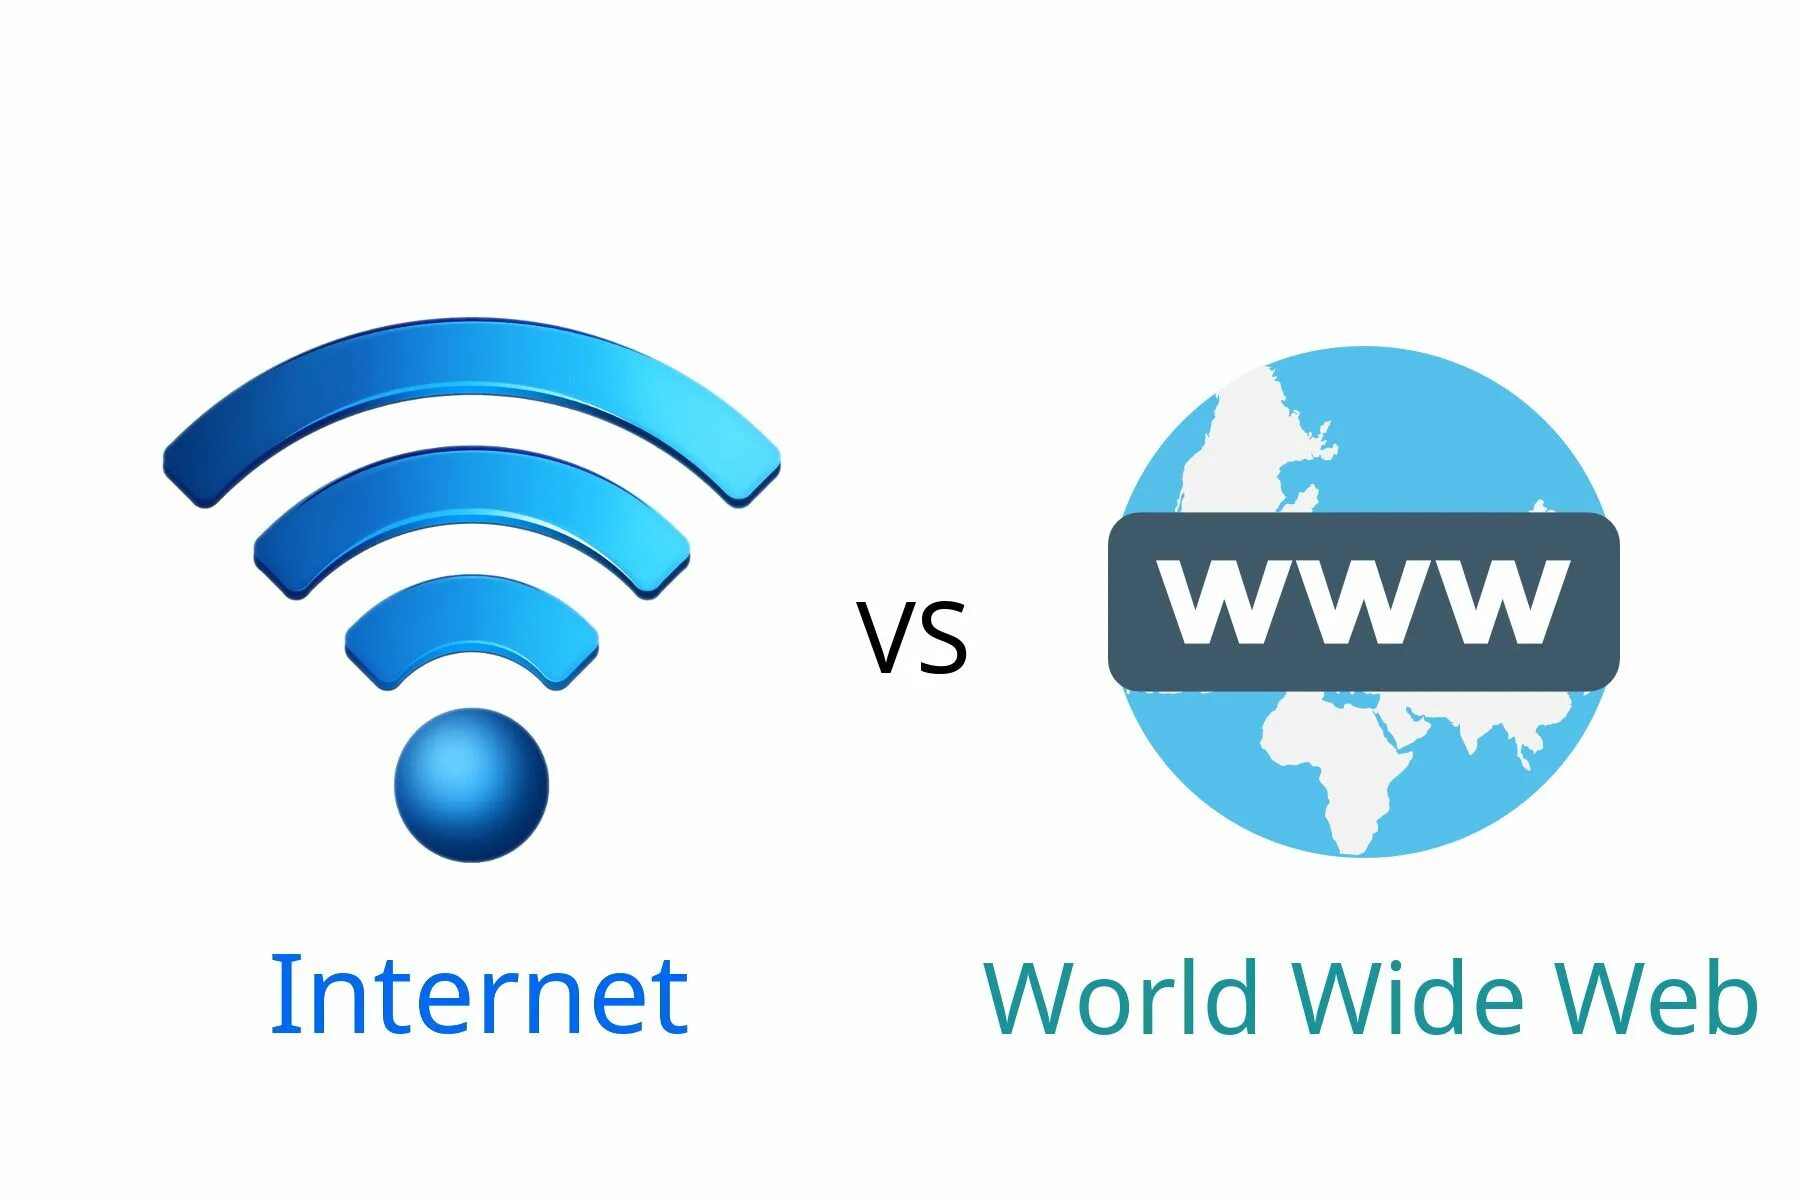 Non networked. Internet www. World wide web Wanderer. World wide web Wanderer бот. Www and Internet difference.